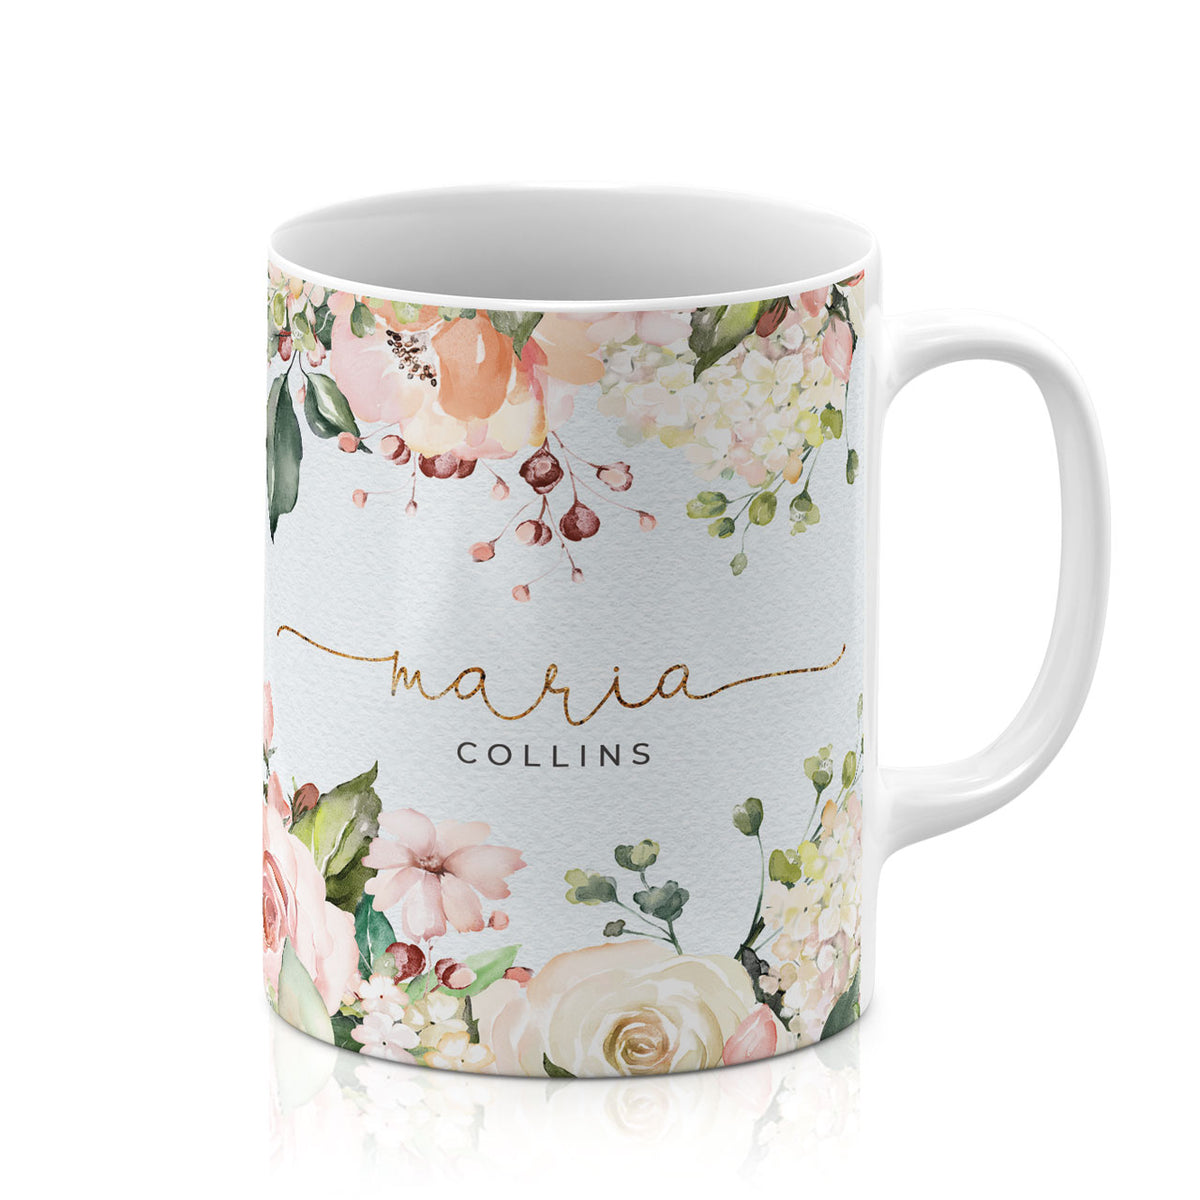 Personalised Ceramic Mug with Name Initials Text Floral Wild Roses Watercolour Golden